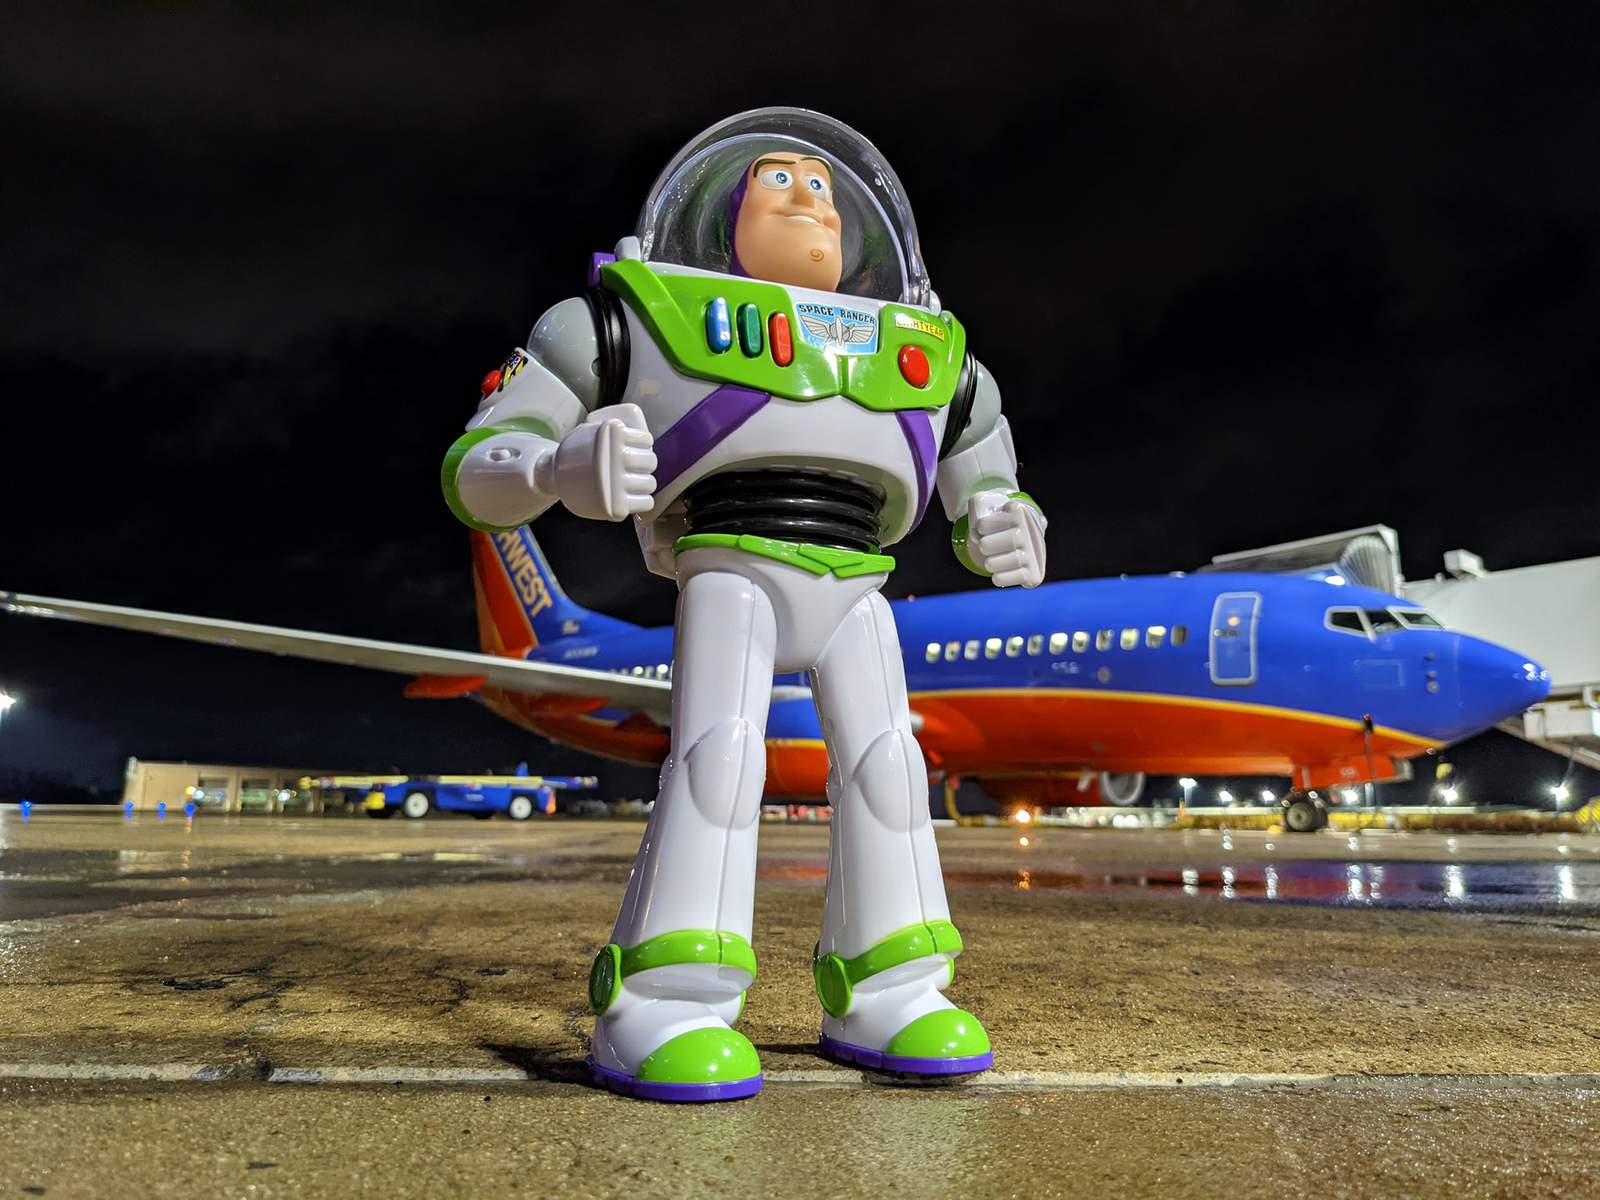 Southwest Airlines employee in Dallas goes ‘to infinity and beyond’ to return boy’s Buzz Lightyear toy